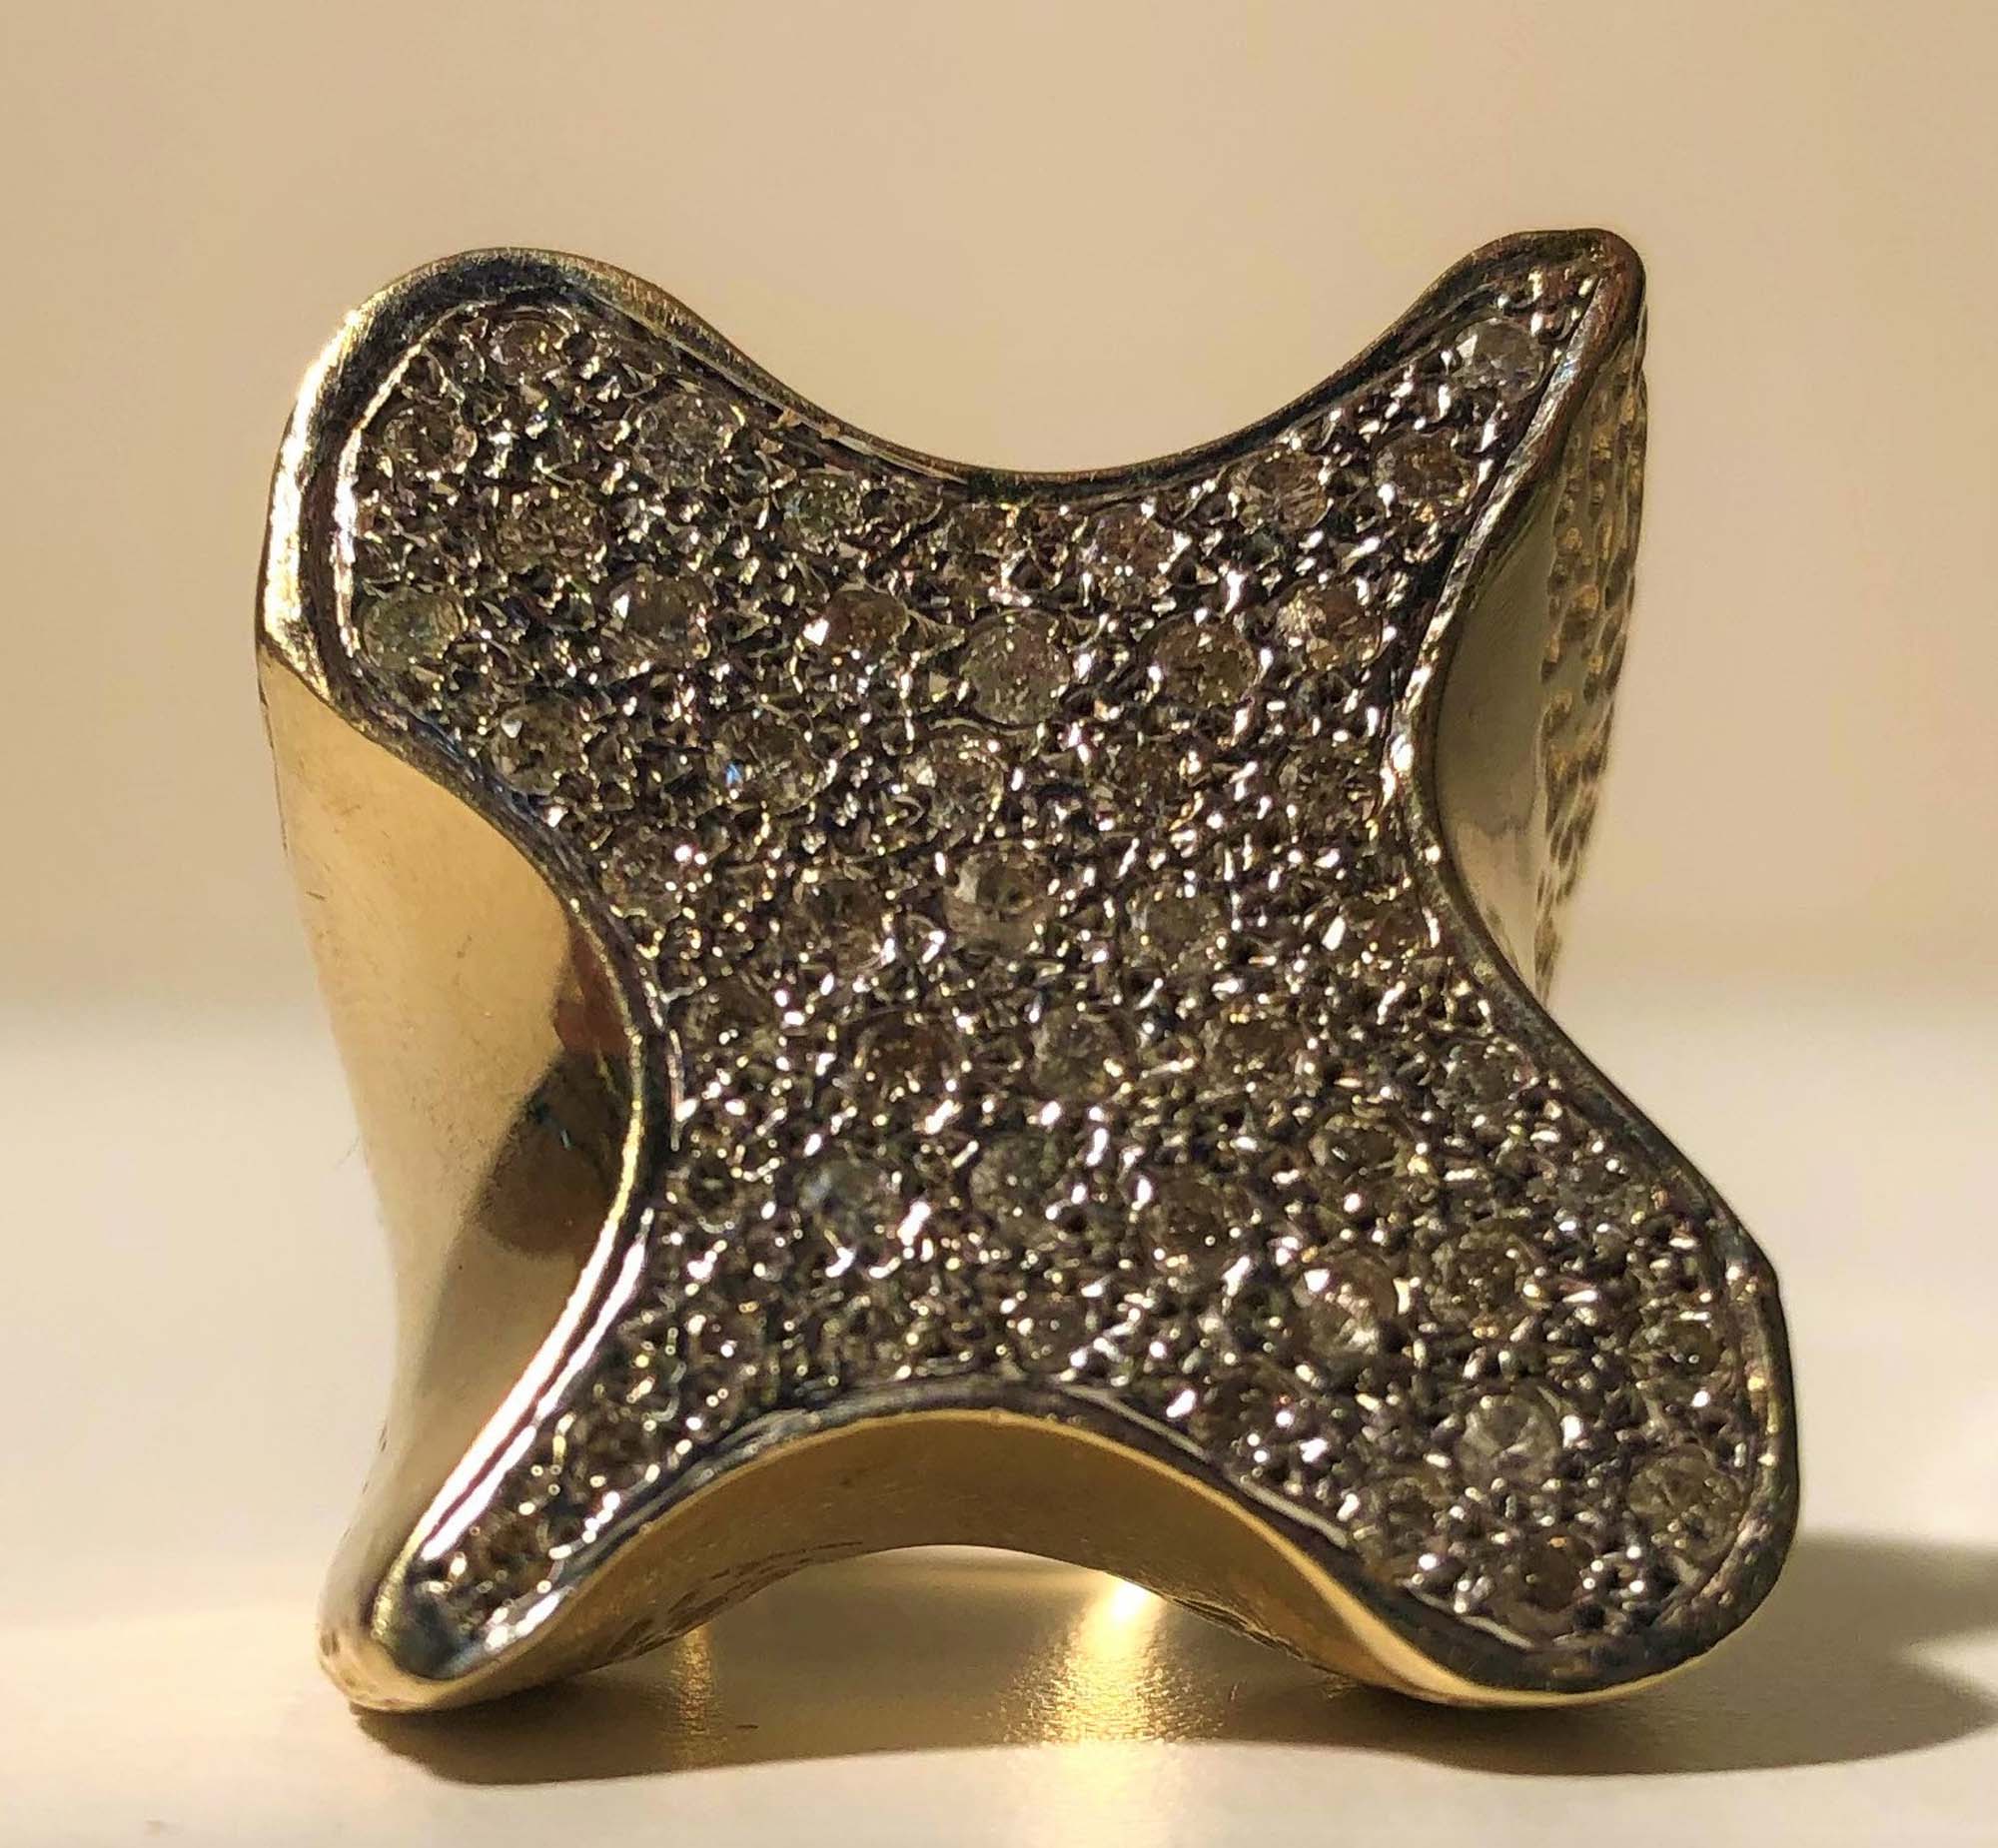 ELVIS PRESLEY PERSONALLY OWNED AND WORN DIAMOND & GOLD "CLOVER" RING. - Image 3 of 6